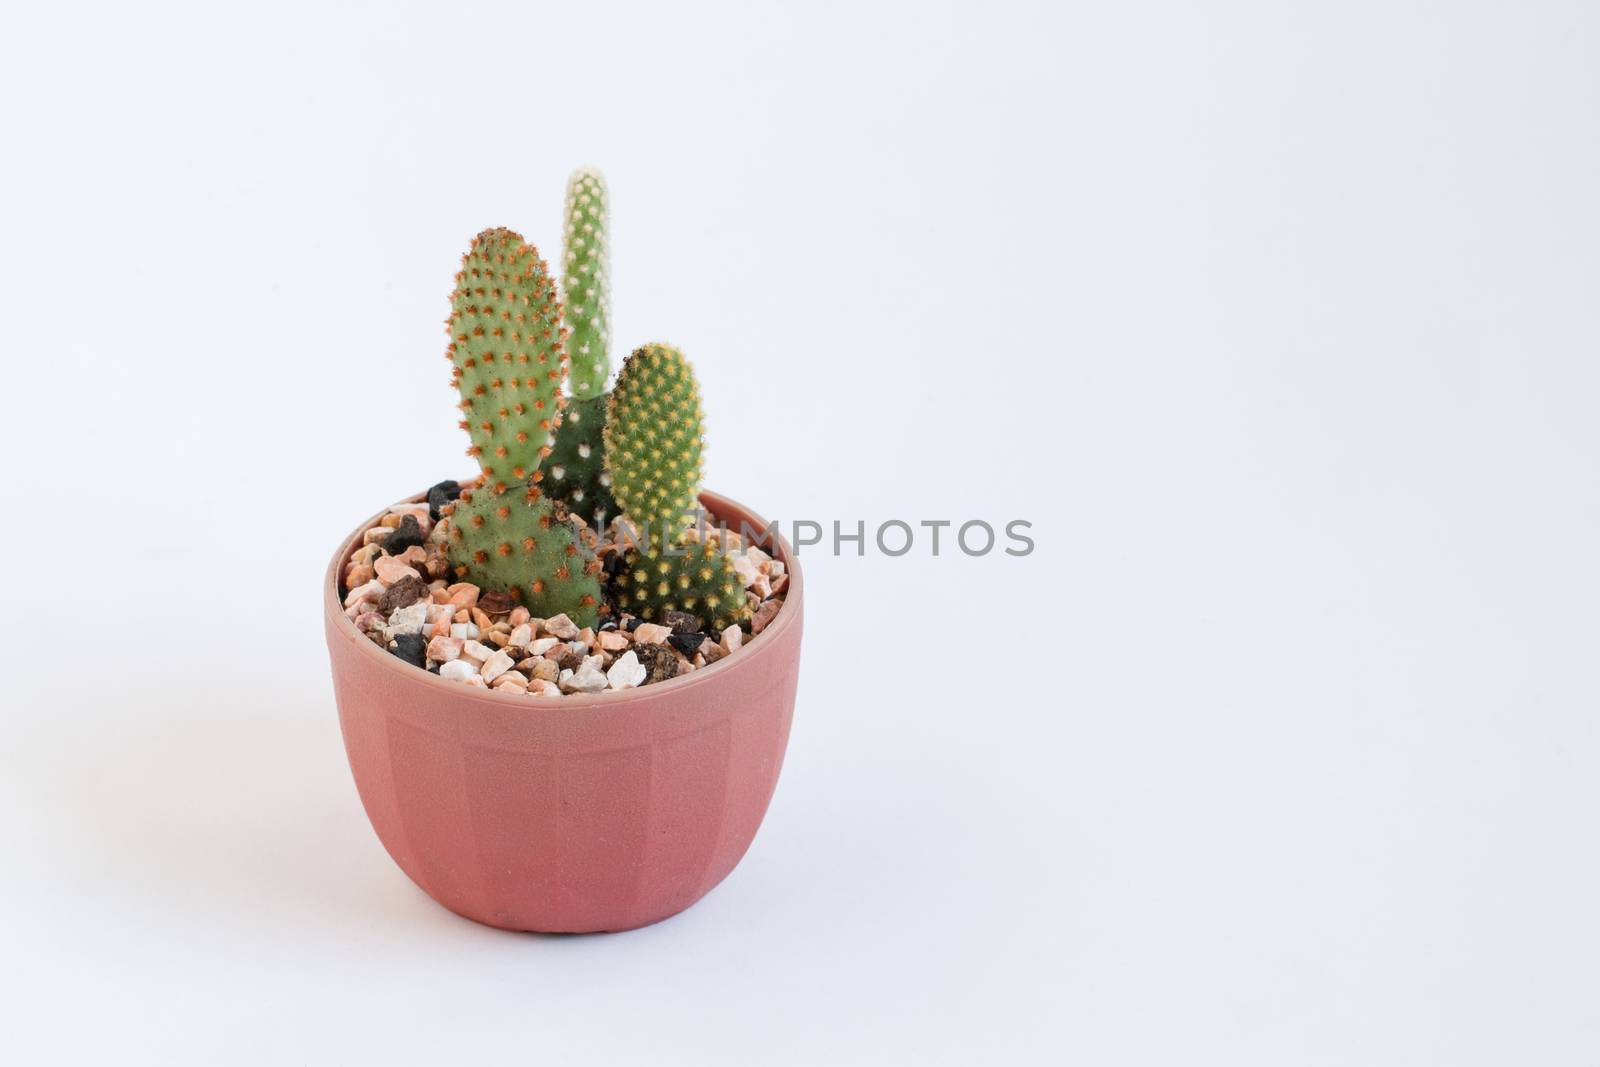 baby cactus in Lovely potted isolated on white background